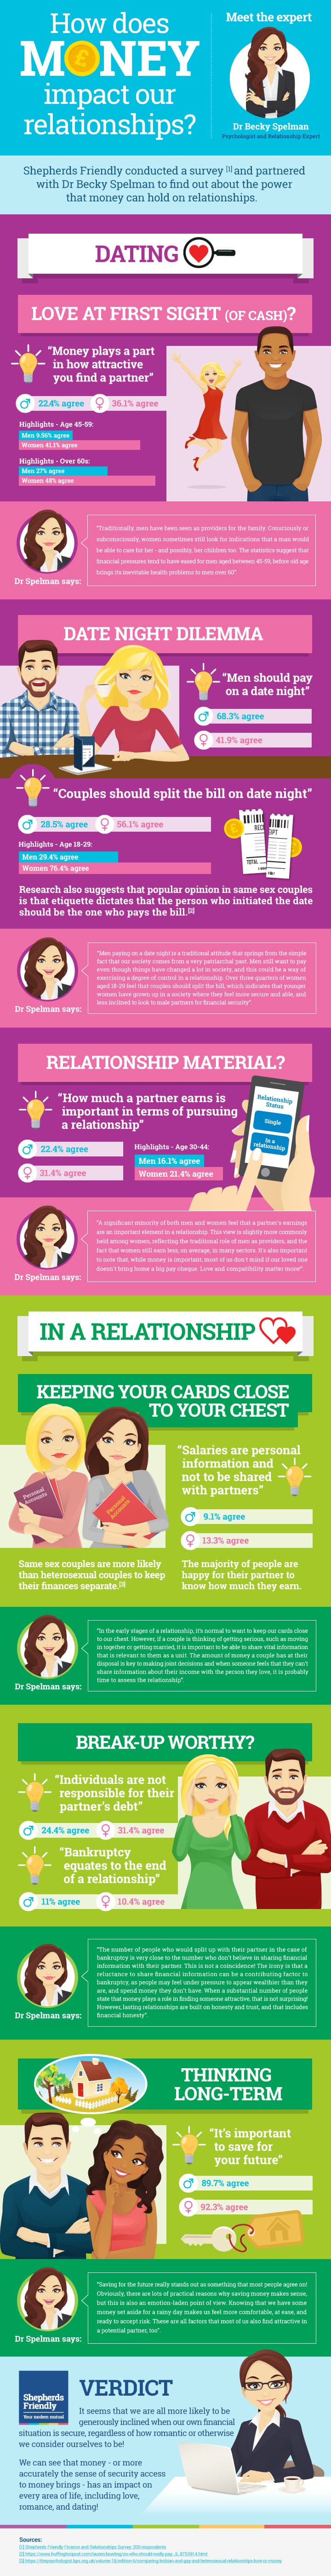 SF-FINANCE-RELATIONSHIP-INFOGRAPHIC